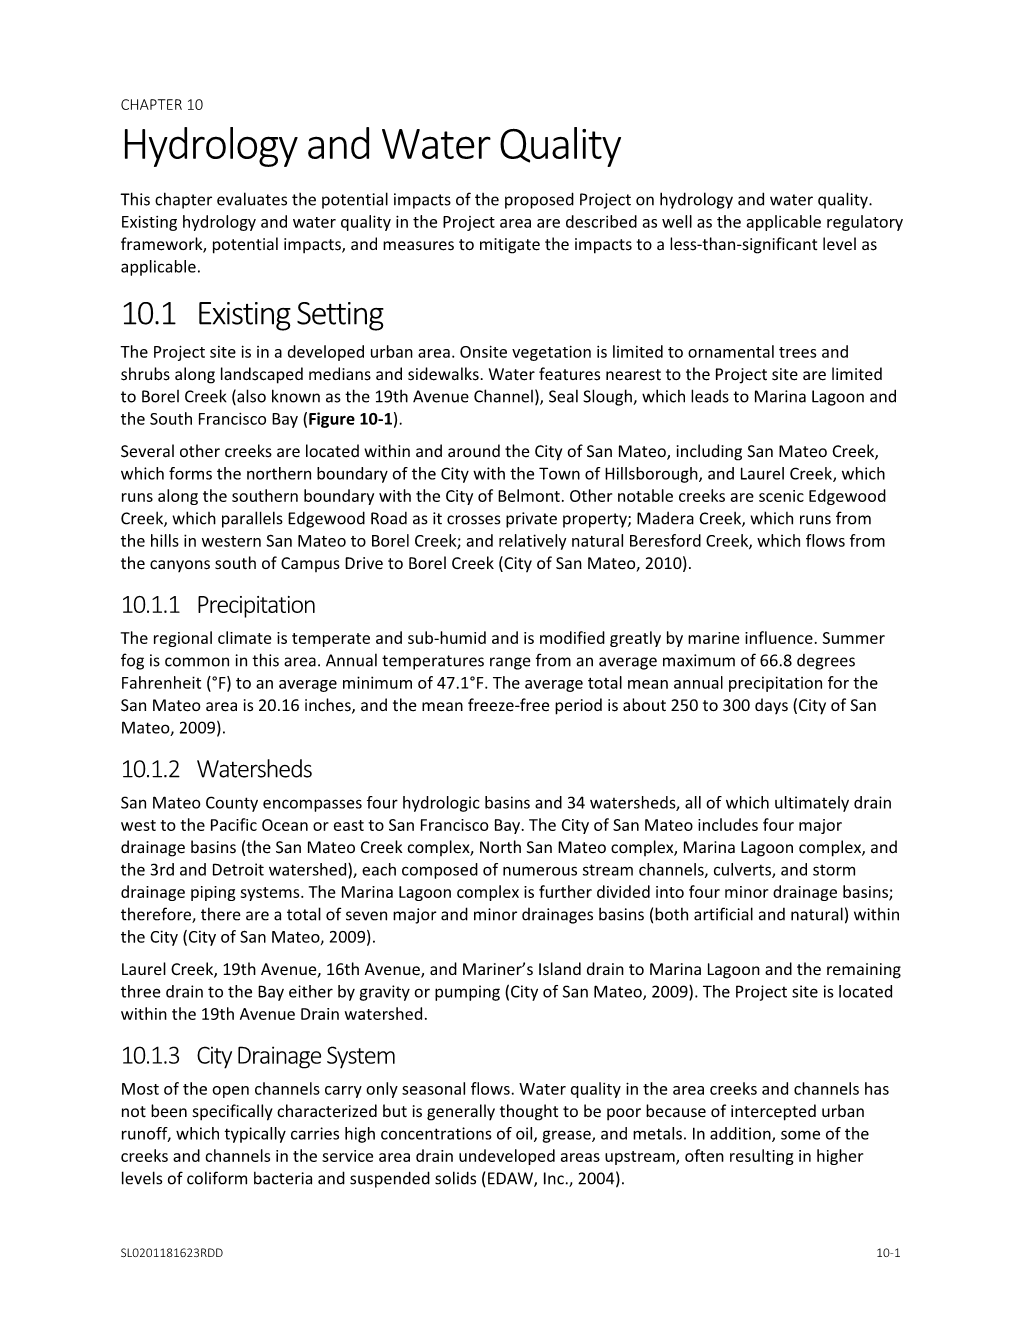 Hydrology and Water Quality